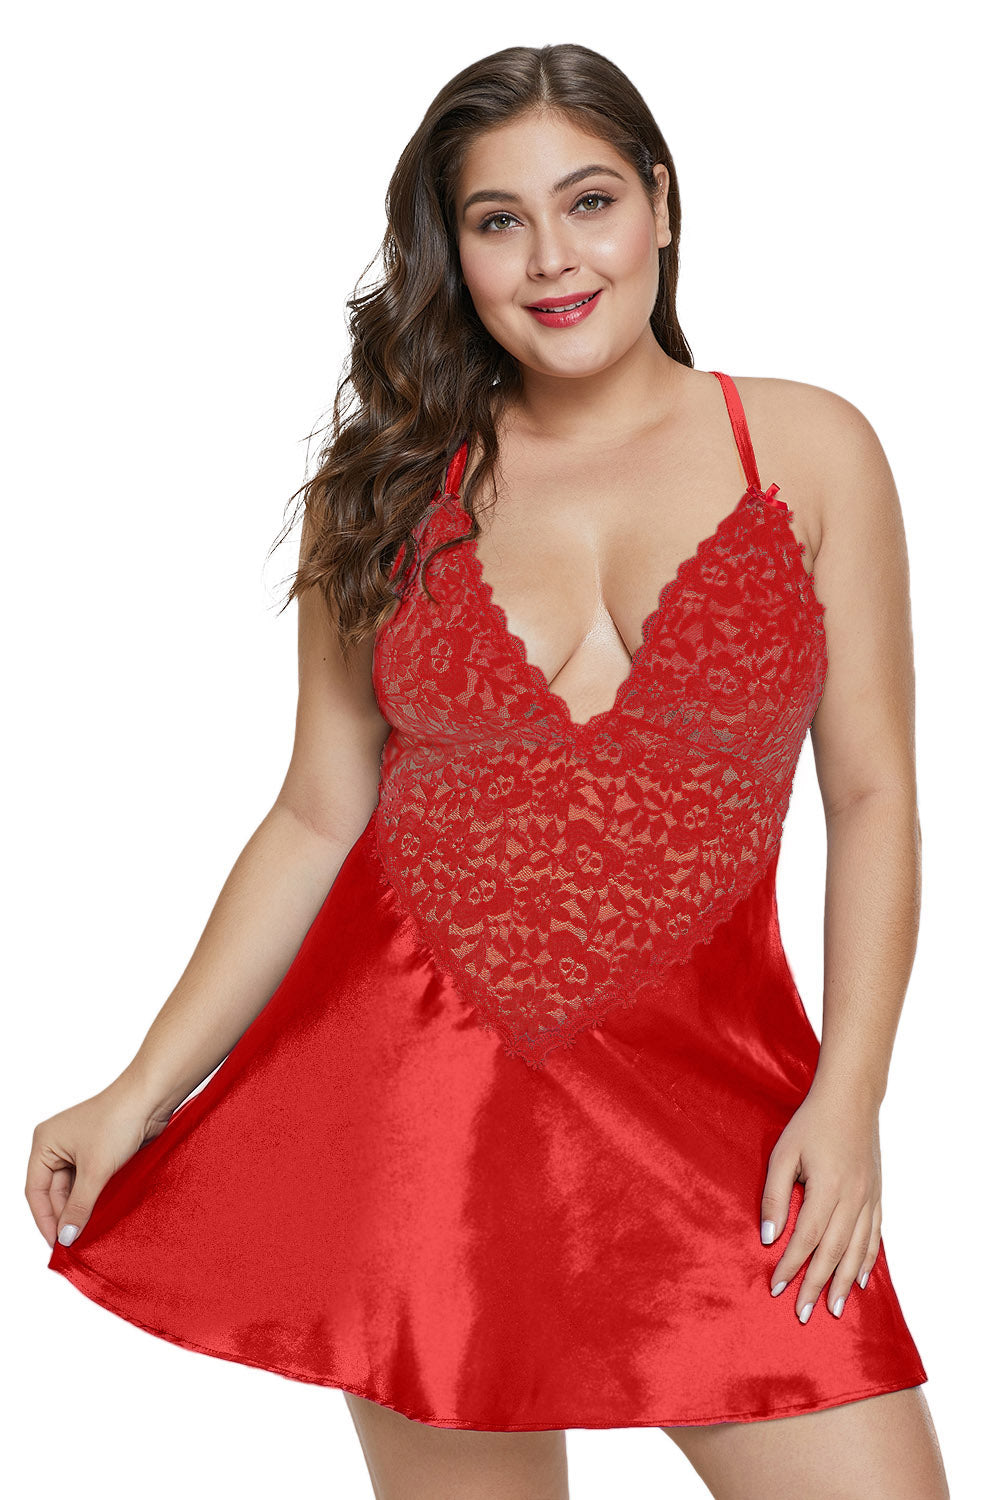 Red Plus Size Satin and Lace Chemise Set